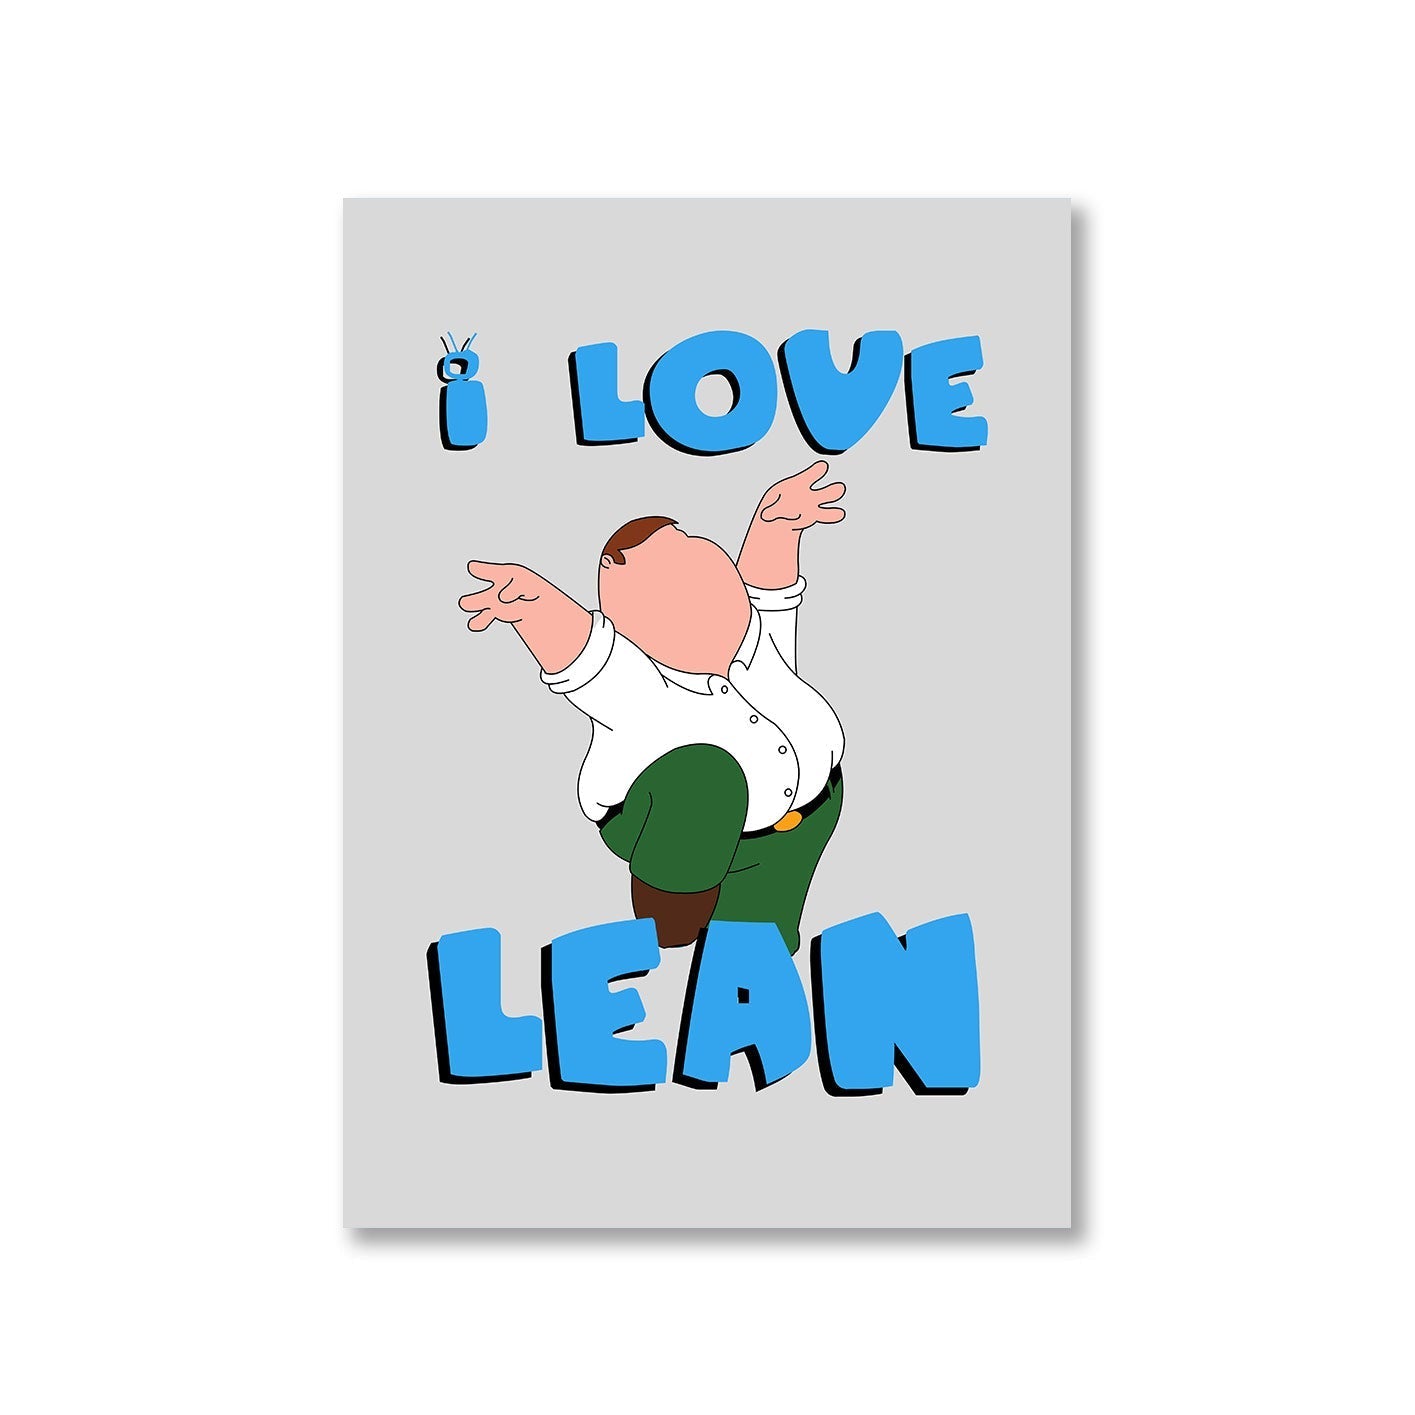 family guy i love lean poster wall art buy online united states of america usa the banyan tee tbt a4 - peter griffin